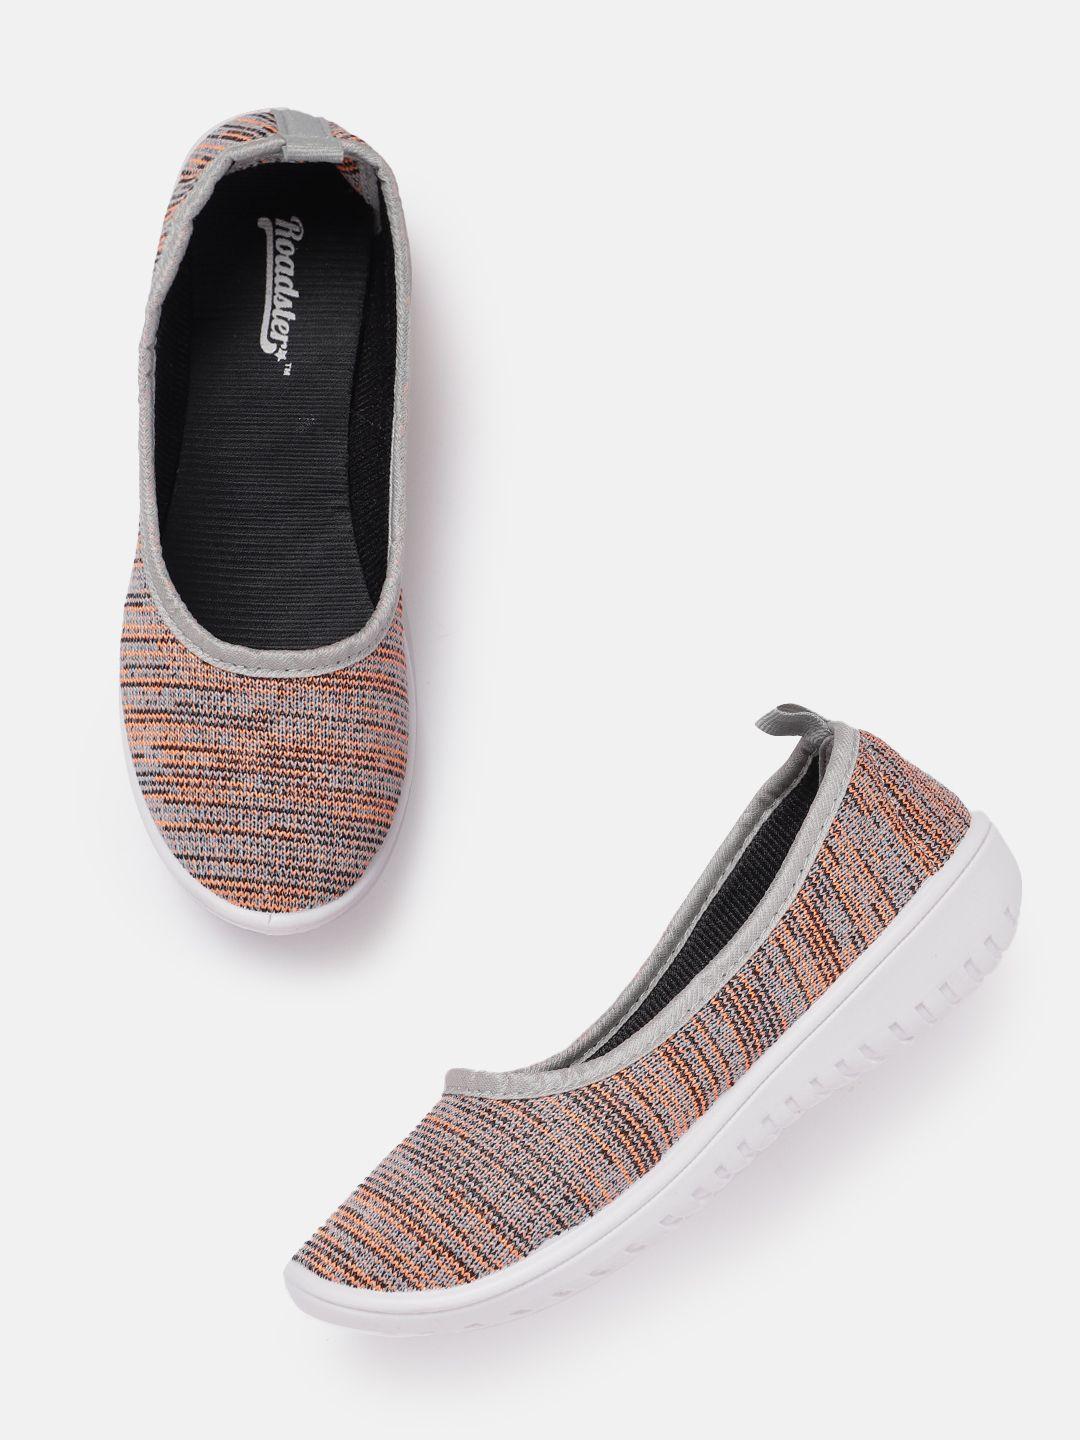 the roadster lifestyle co. women woven design slip-on sneakers